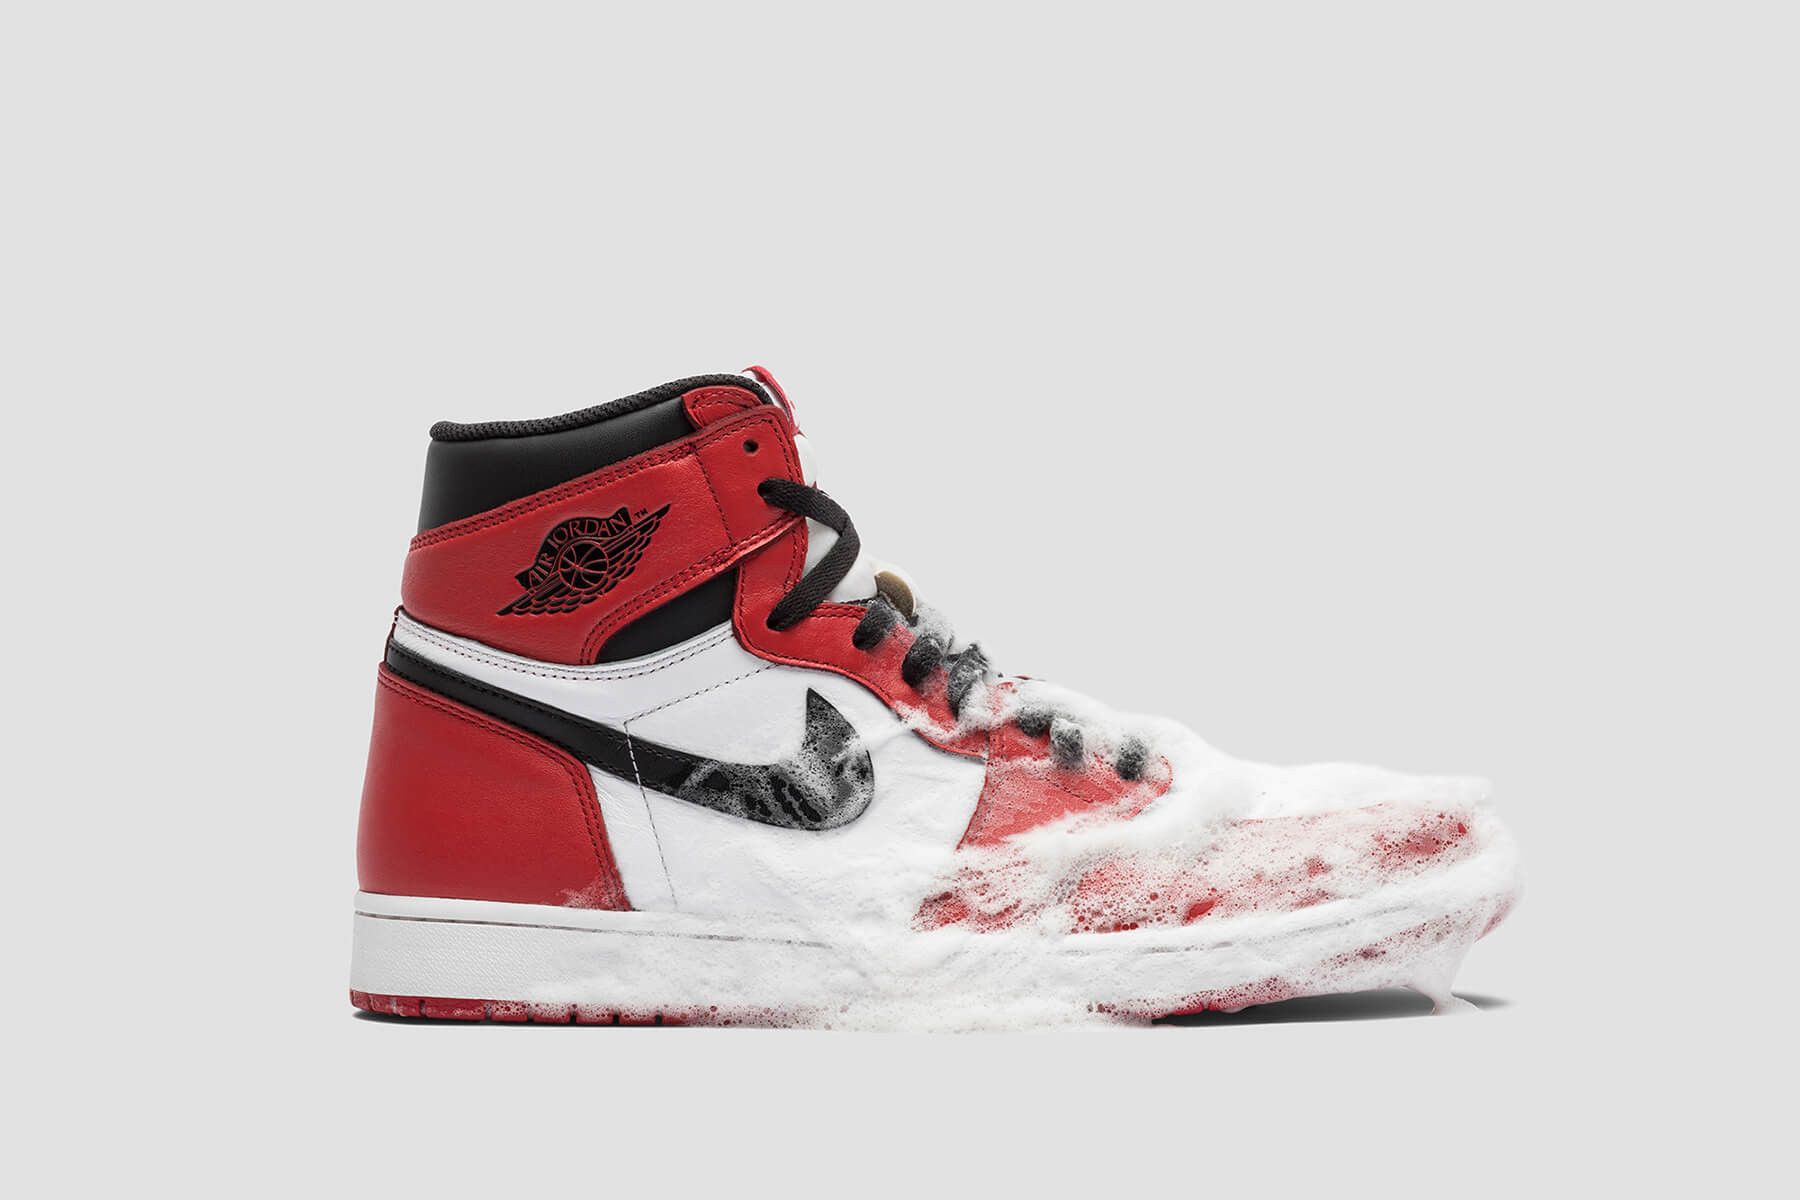 how to get stains out of jordan 1